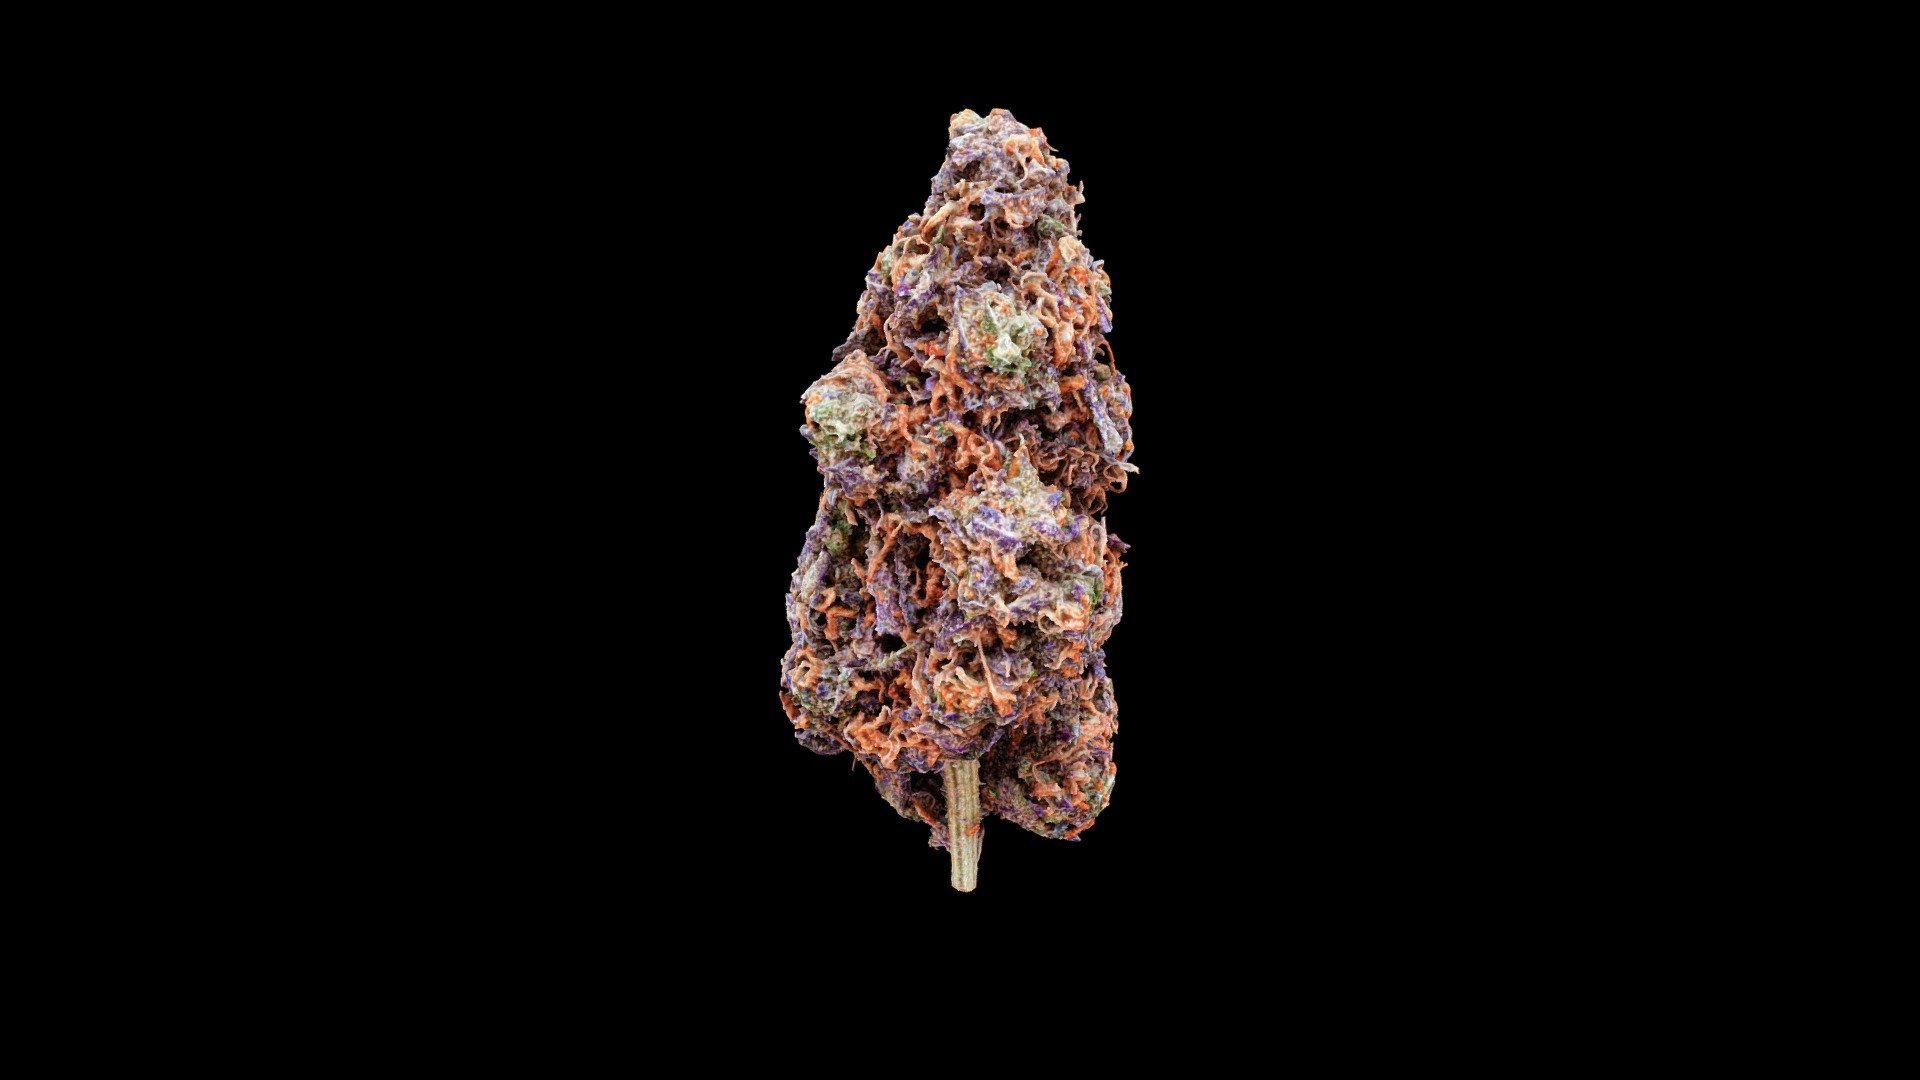 Cannabis bud, Cherry Cookies strain, created using photogrammetry. To be used as part of an NFT collection, and for demonstrating 3D cannabis menu capabilities.

Equipment used: Sony A7R IV, 3DS Max.

Not for sale 3d model